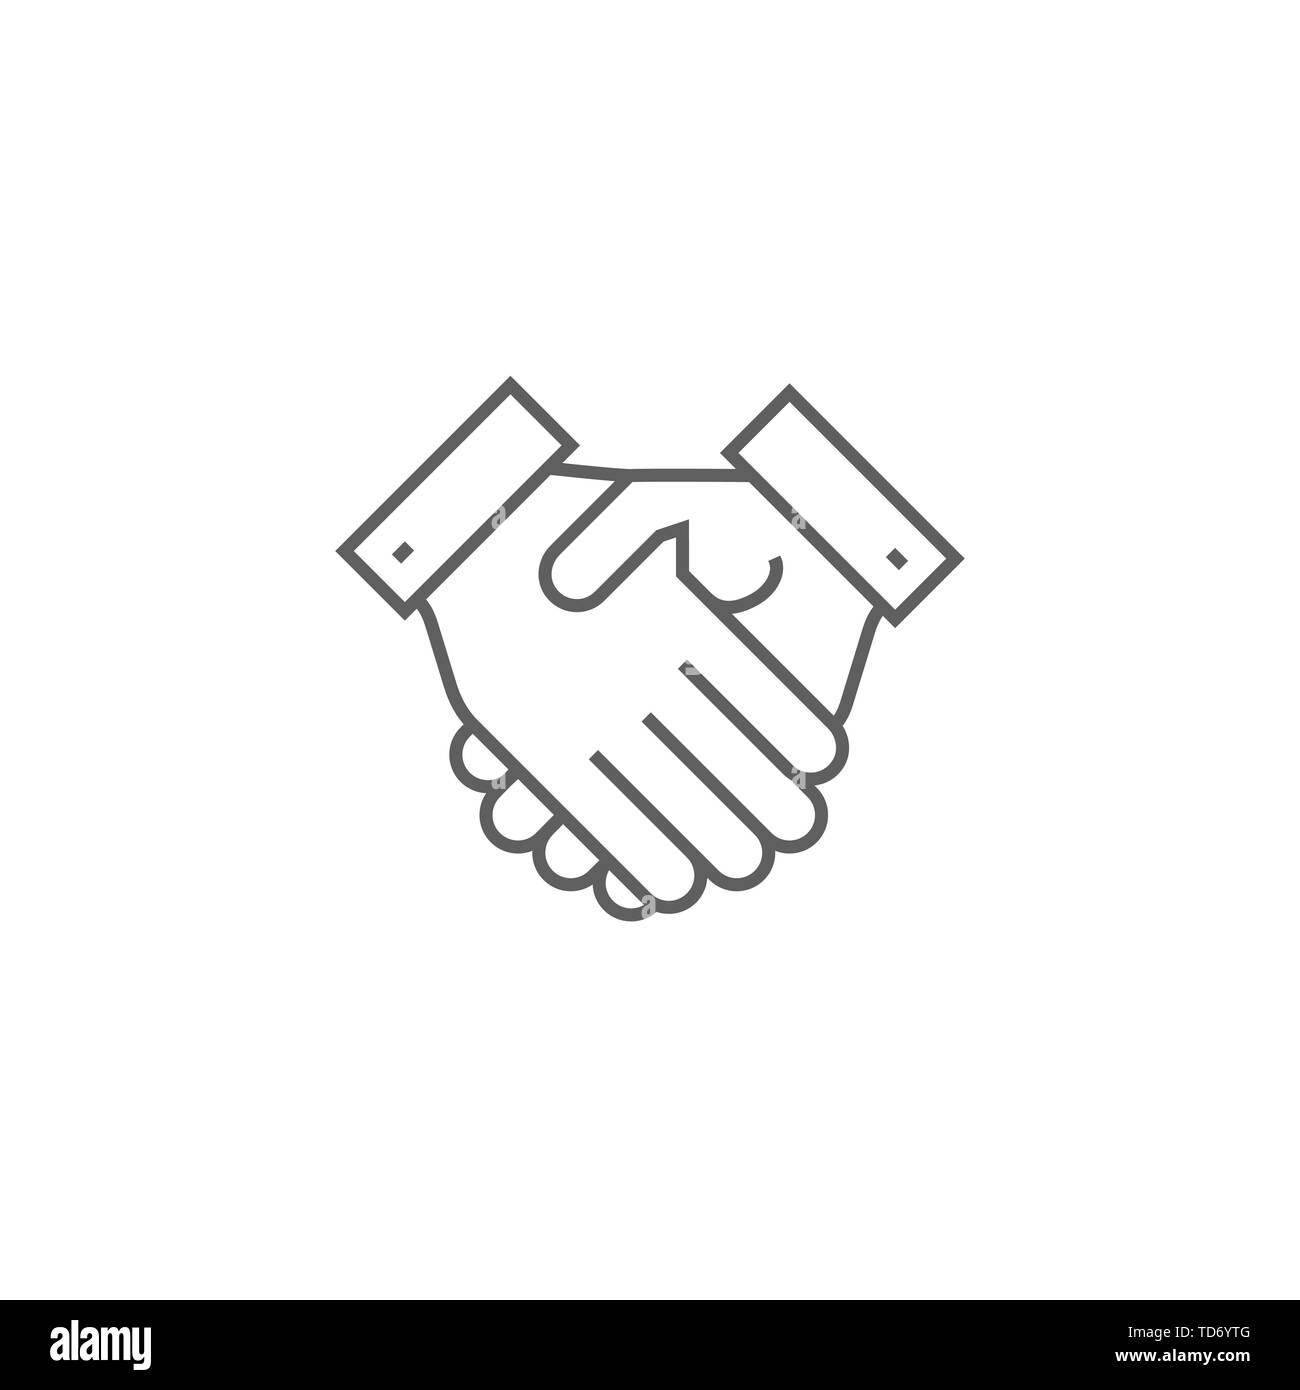 Handshake Related Vector Thin Line Icon. Isolated on White Background. Editable Stroke. Vector Illustration. Stock Vector